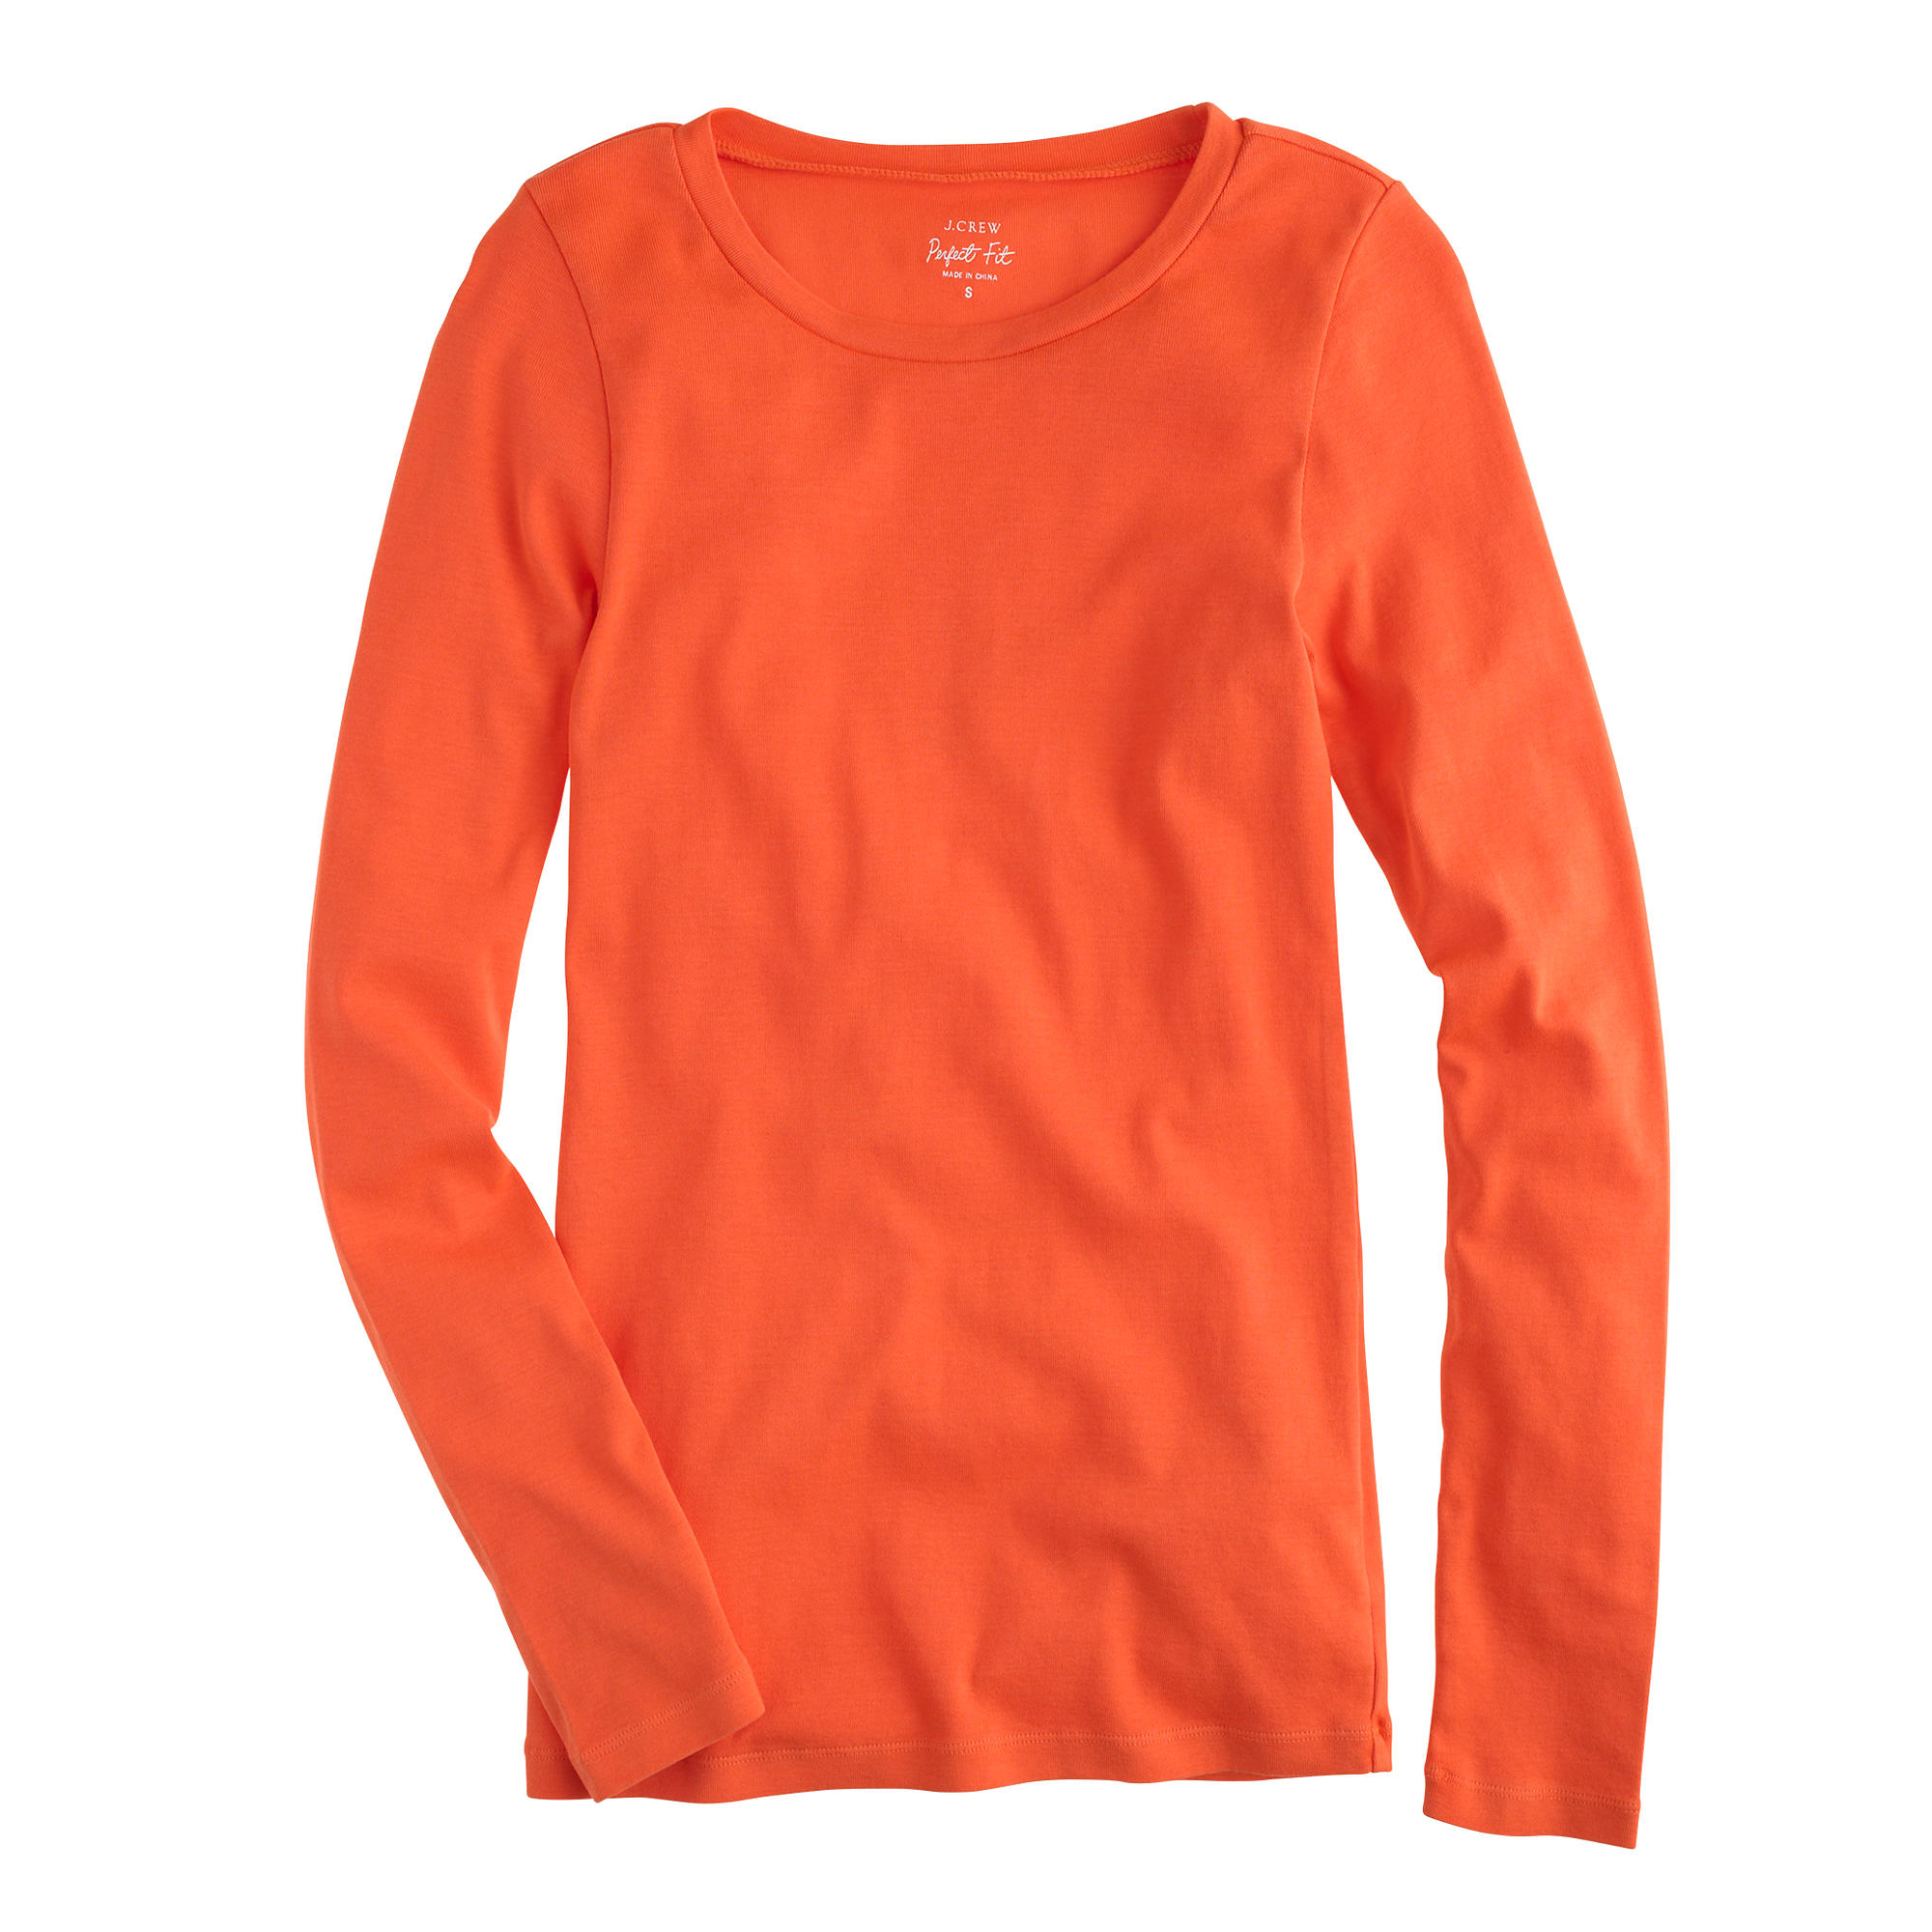 Lyst - J.Crew Perfect-fit Long-sleeve T-shirt in Orange